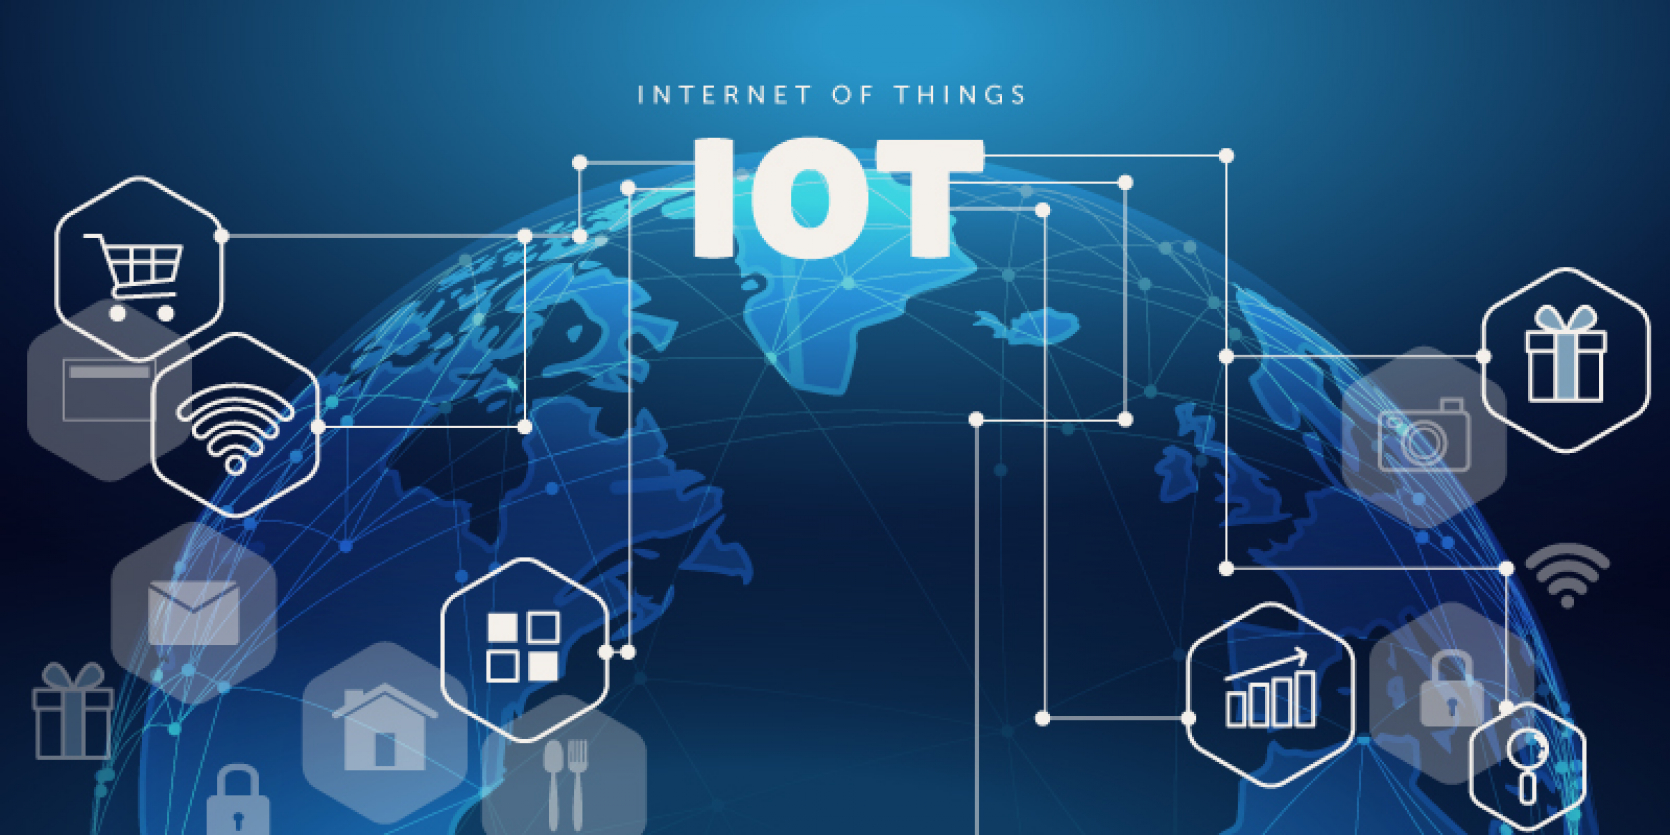 10 IOT TECHNOLOGY TRENDS TO WATCH IN 2022